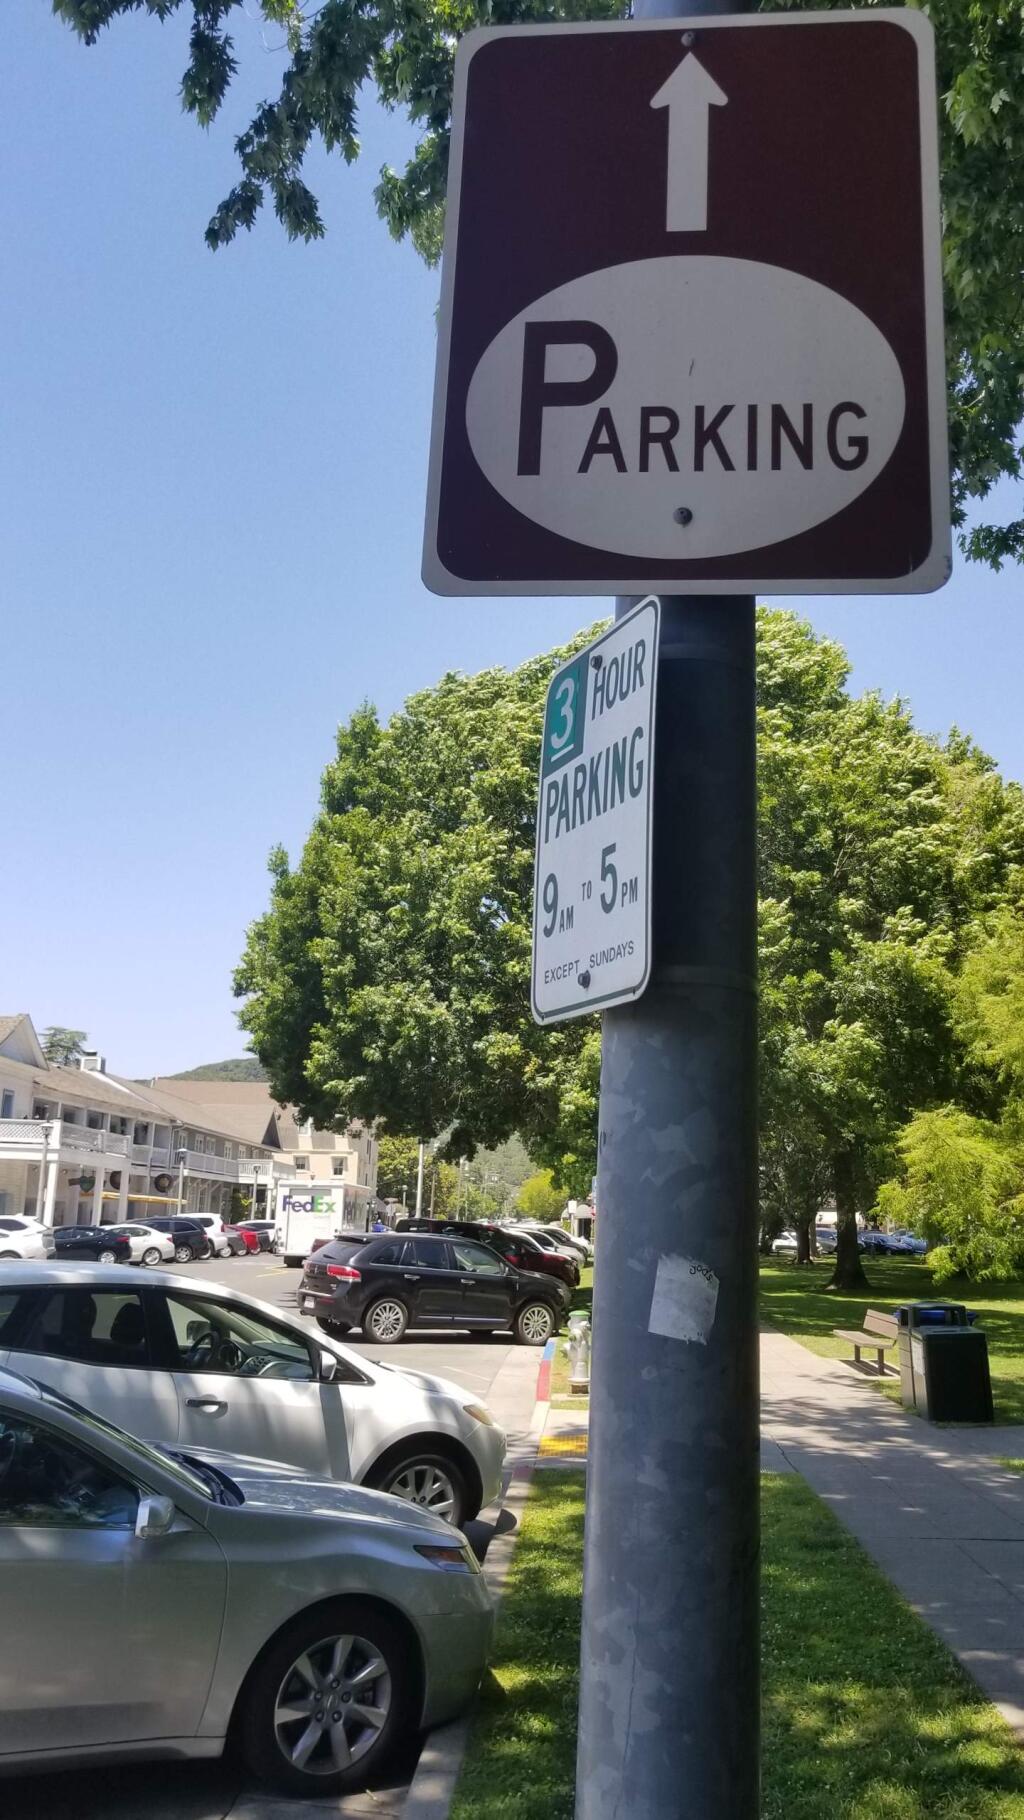 Much-needed direction these days on First Street West. The parking time limits were instituted in the 1970s.